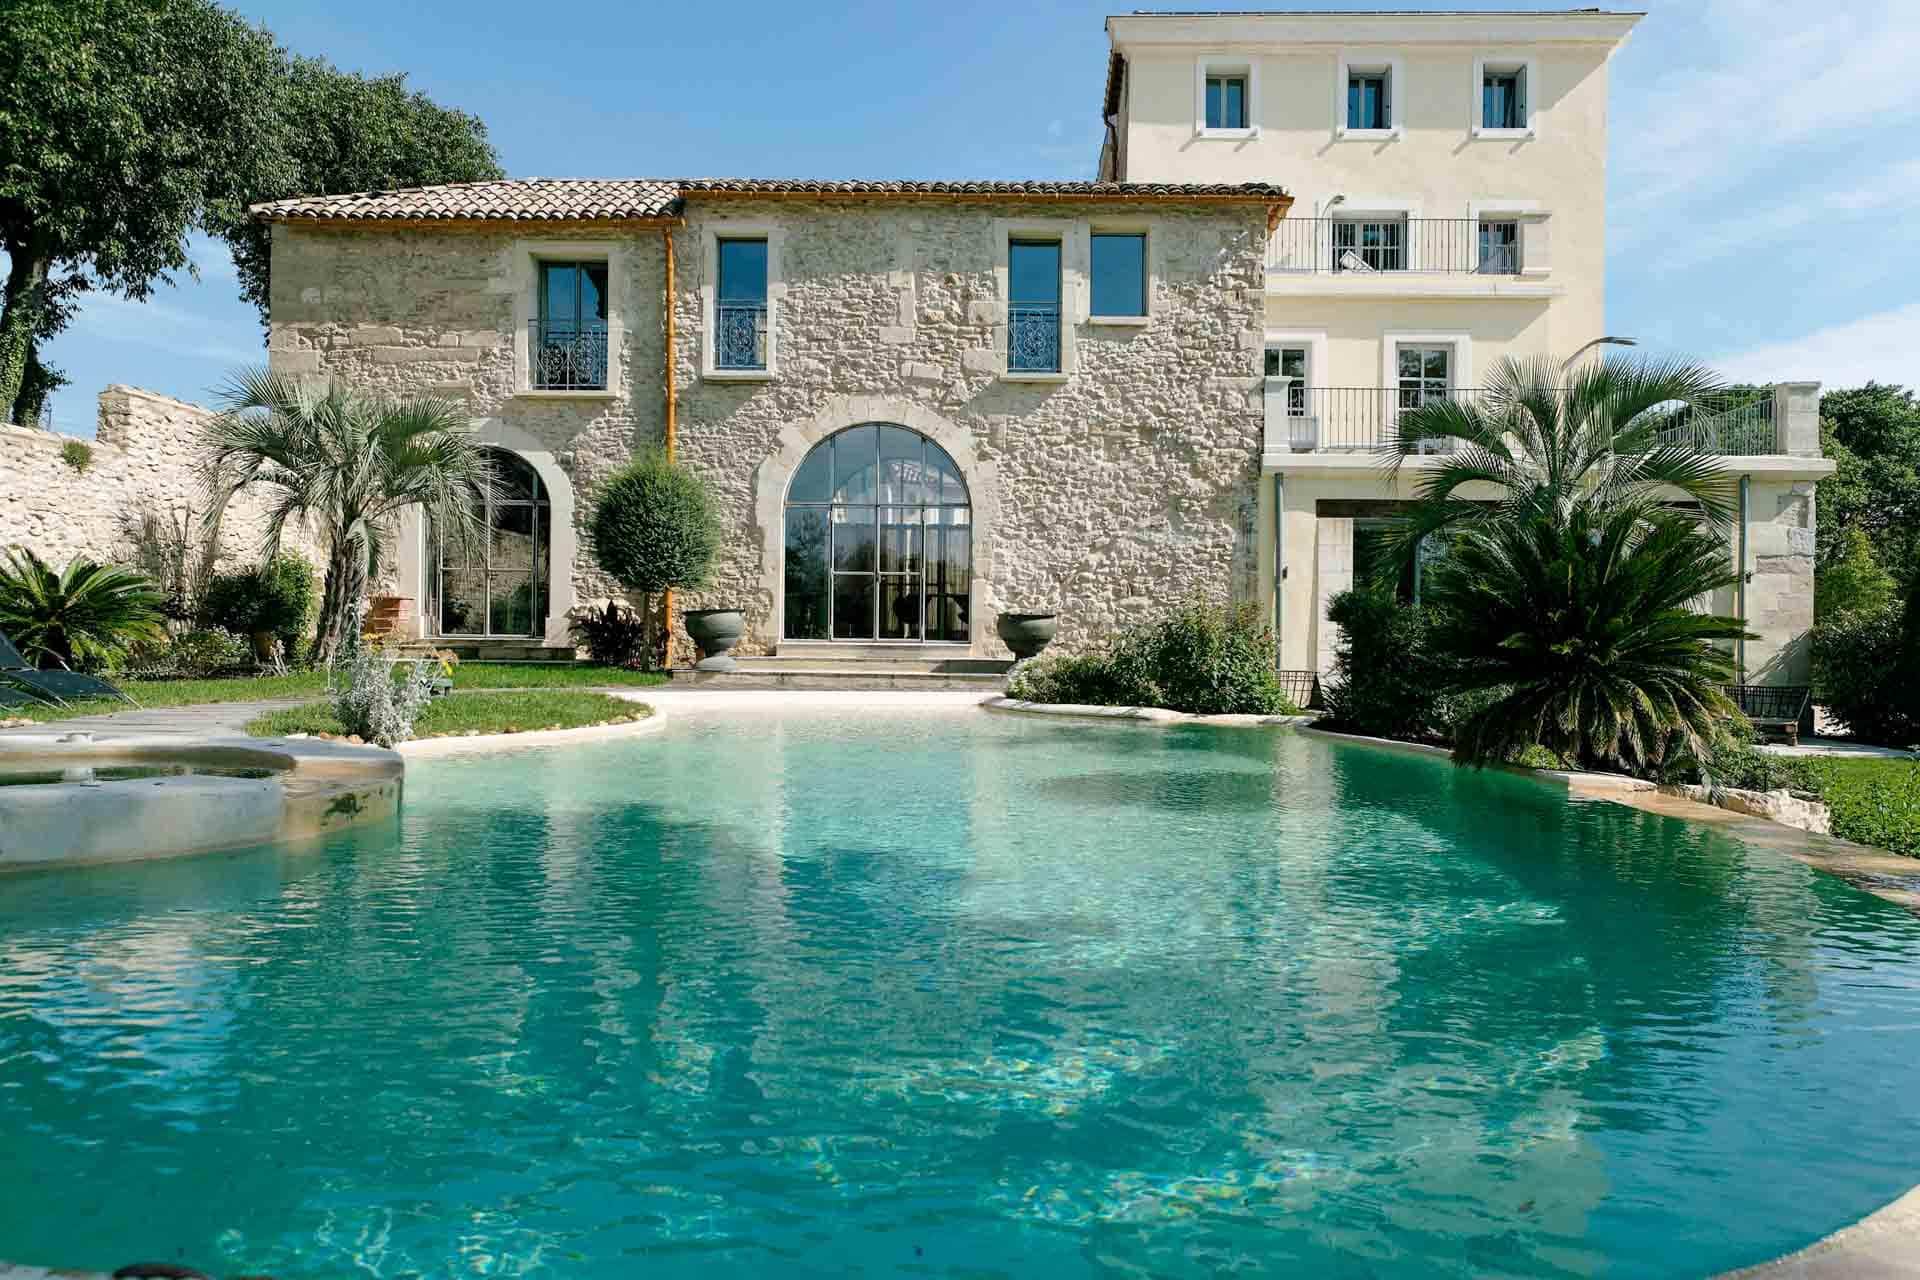 Best Hotels in Languedoc-Roussillon: Nature Weekend